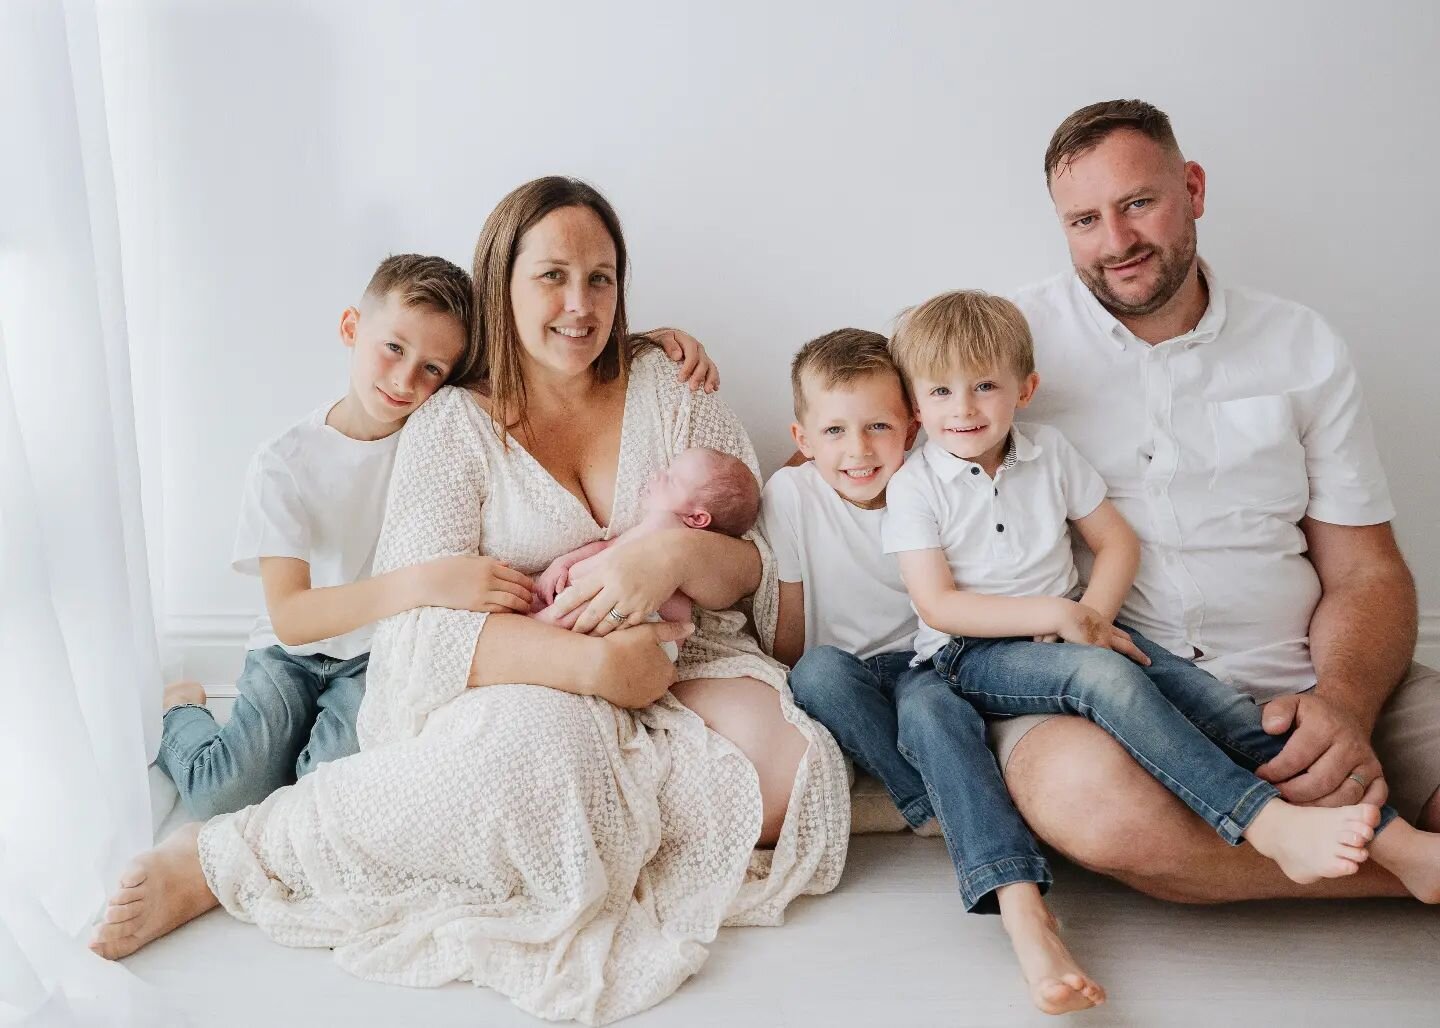 Family 🤍💙

I wasn't quite sure how this session was going to go with three energetic boys and a newborn. I was pleasantly suprised, the boys were amazing. They were completly besotted with their baby brother and you can see it throughout their gall